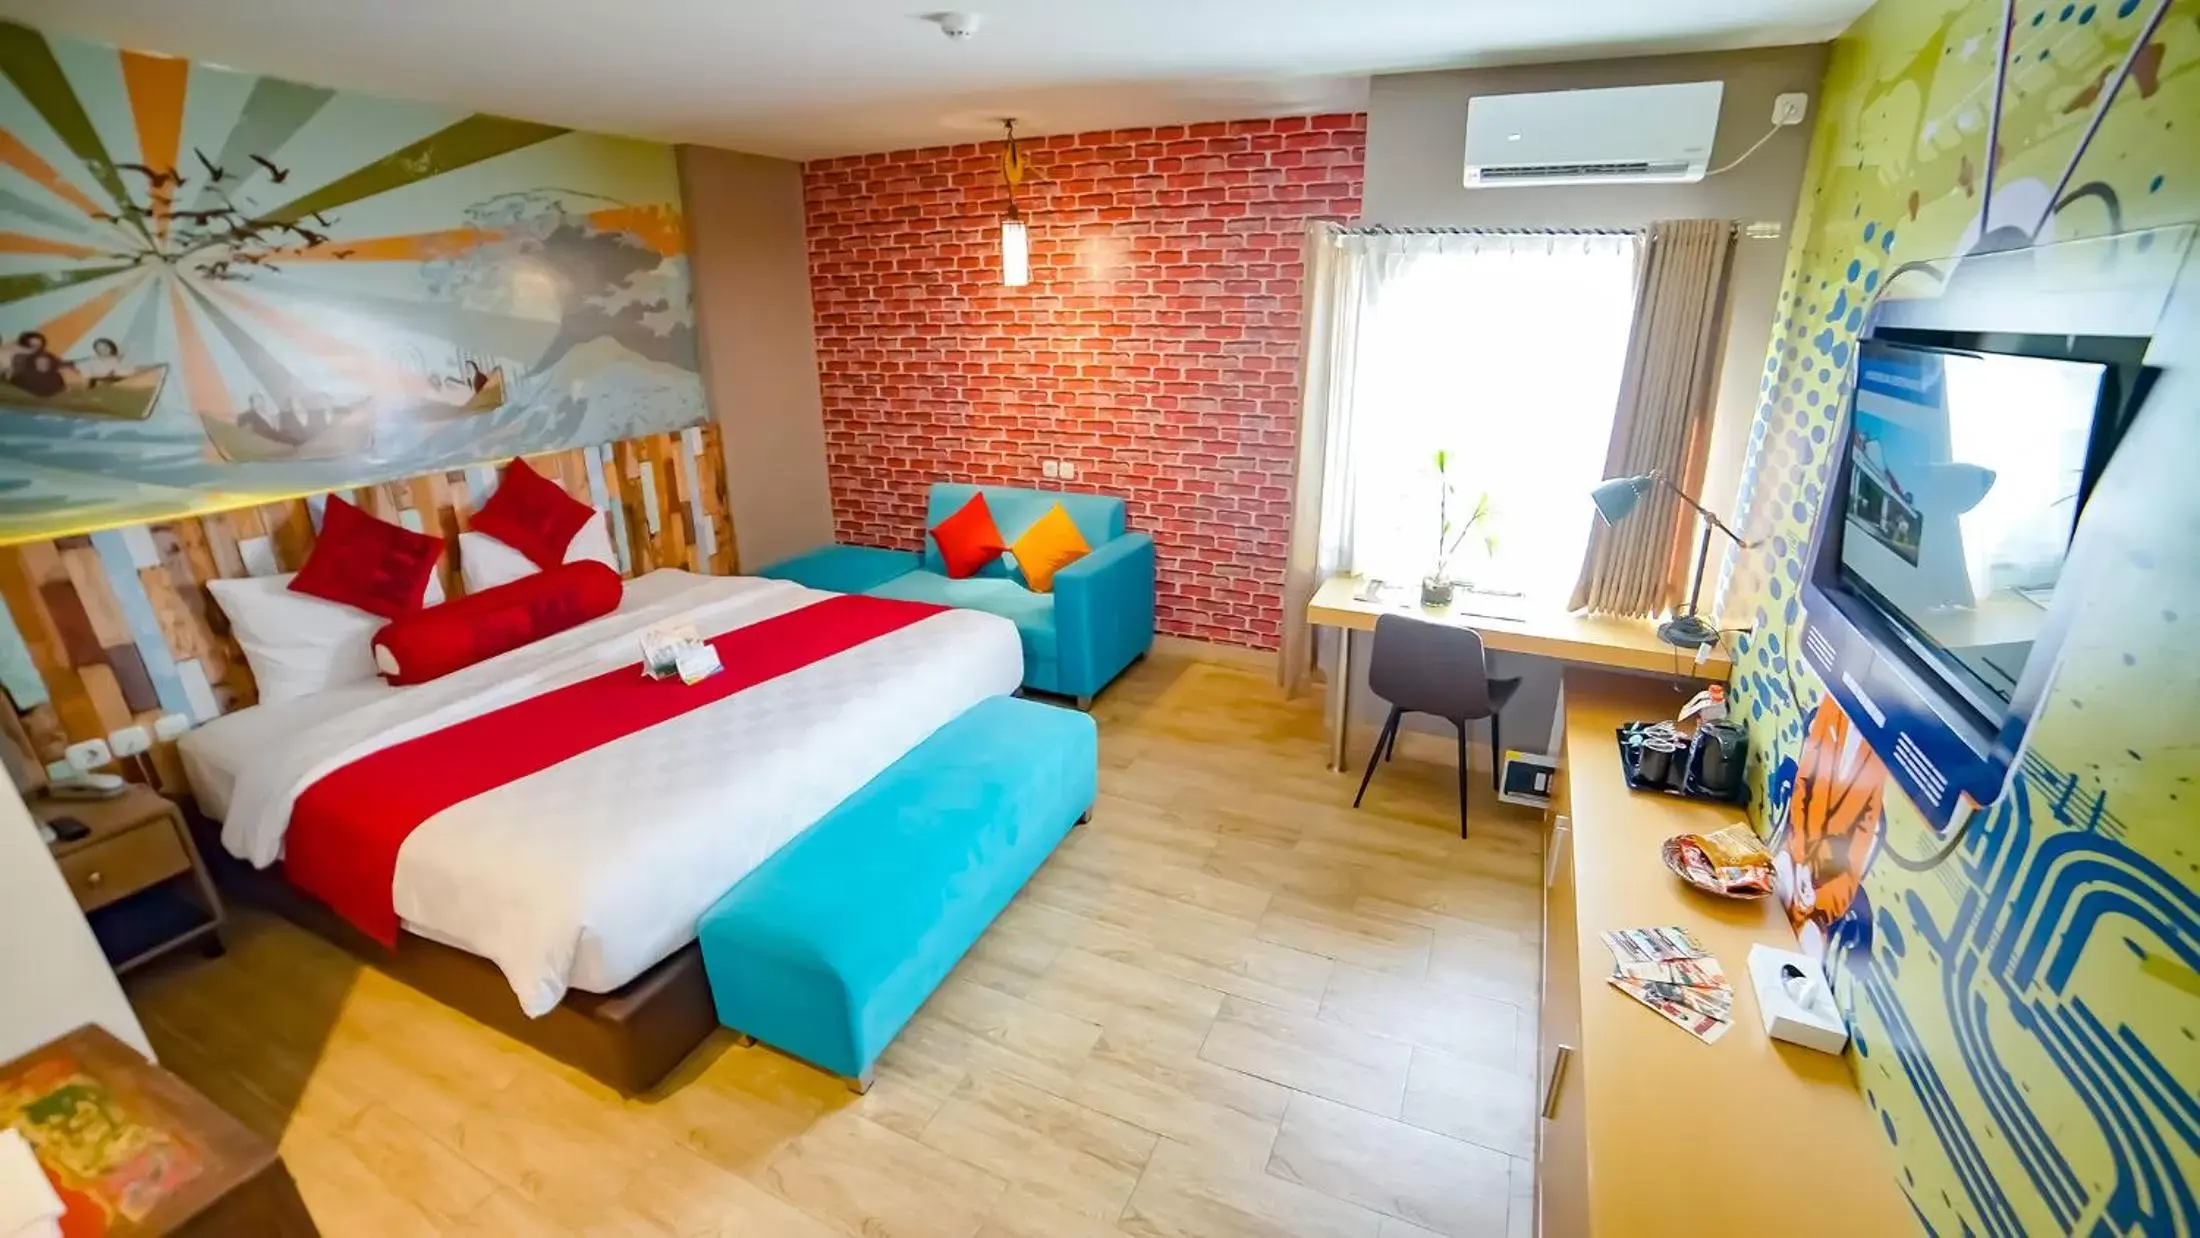 Bed in Meotel Purwokerto